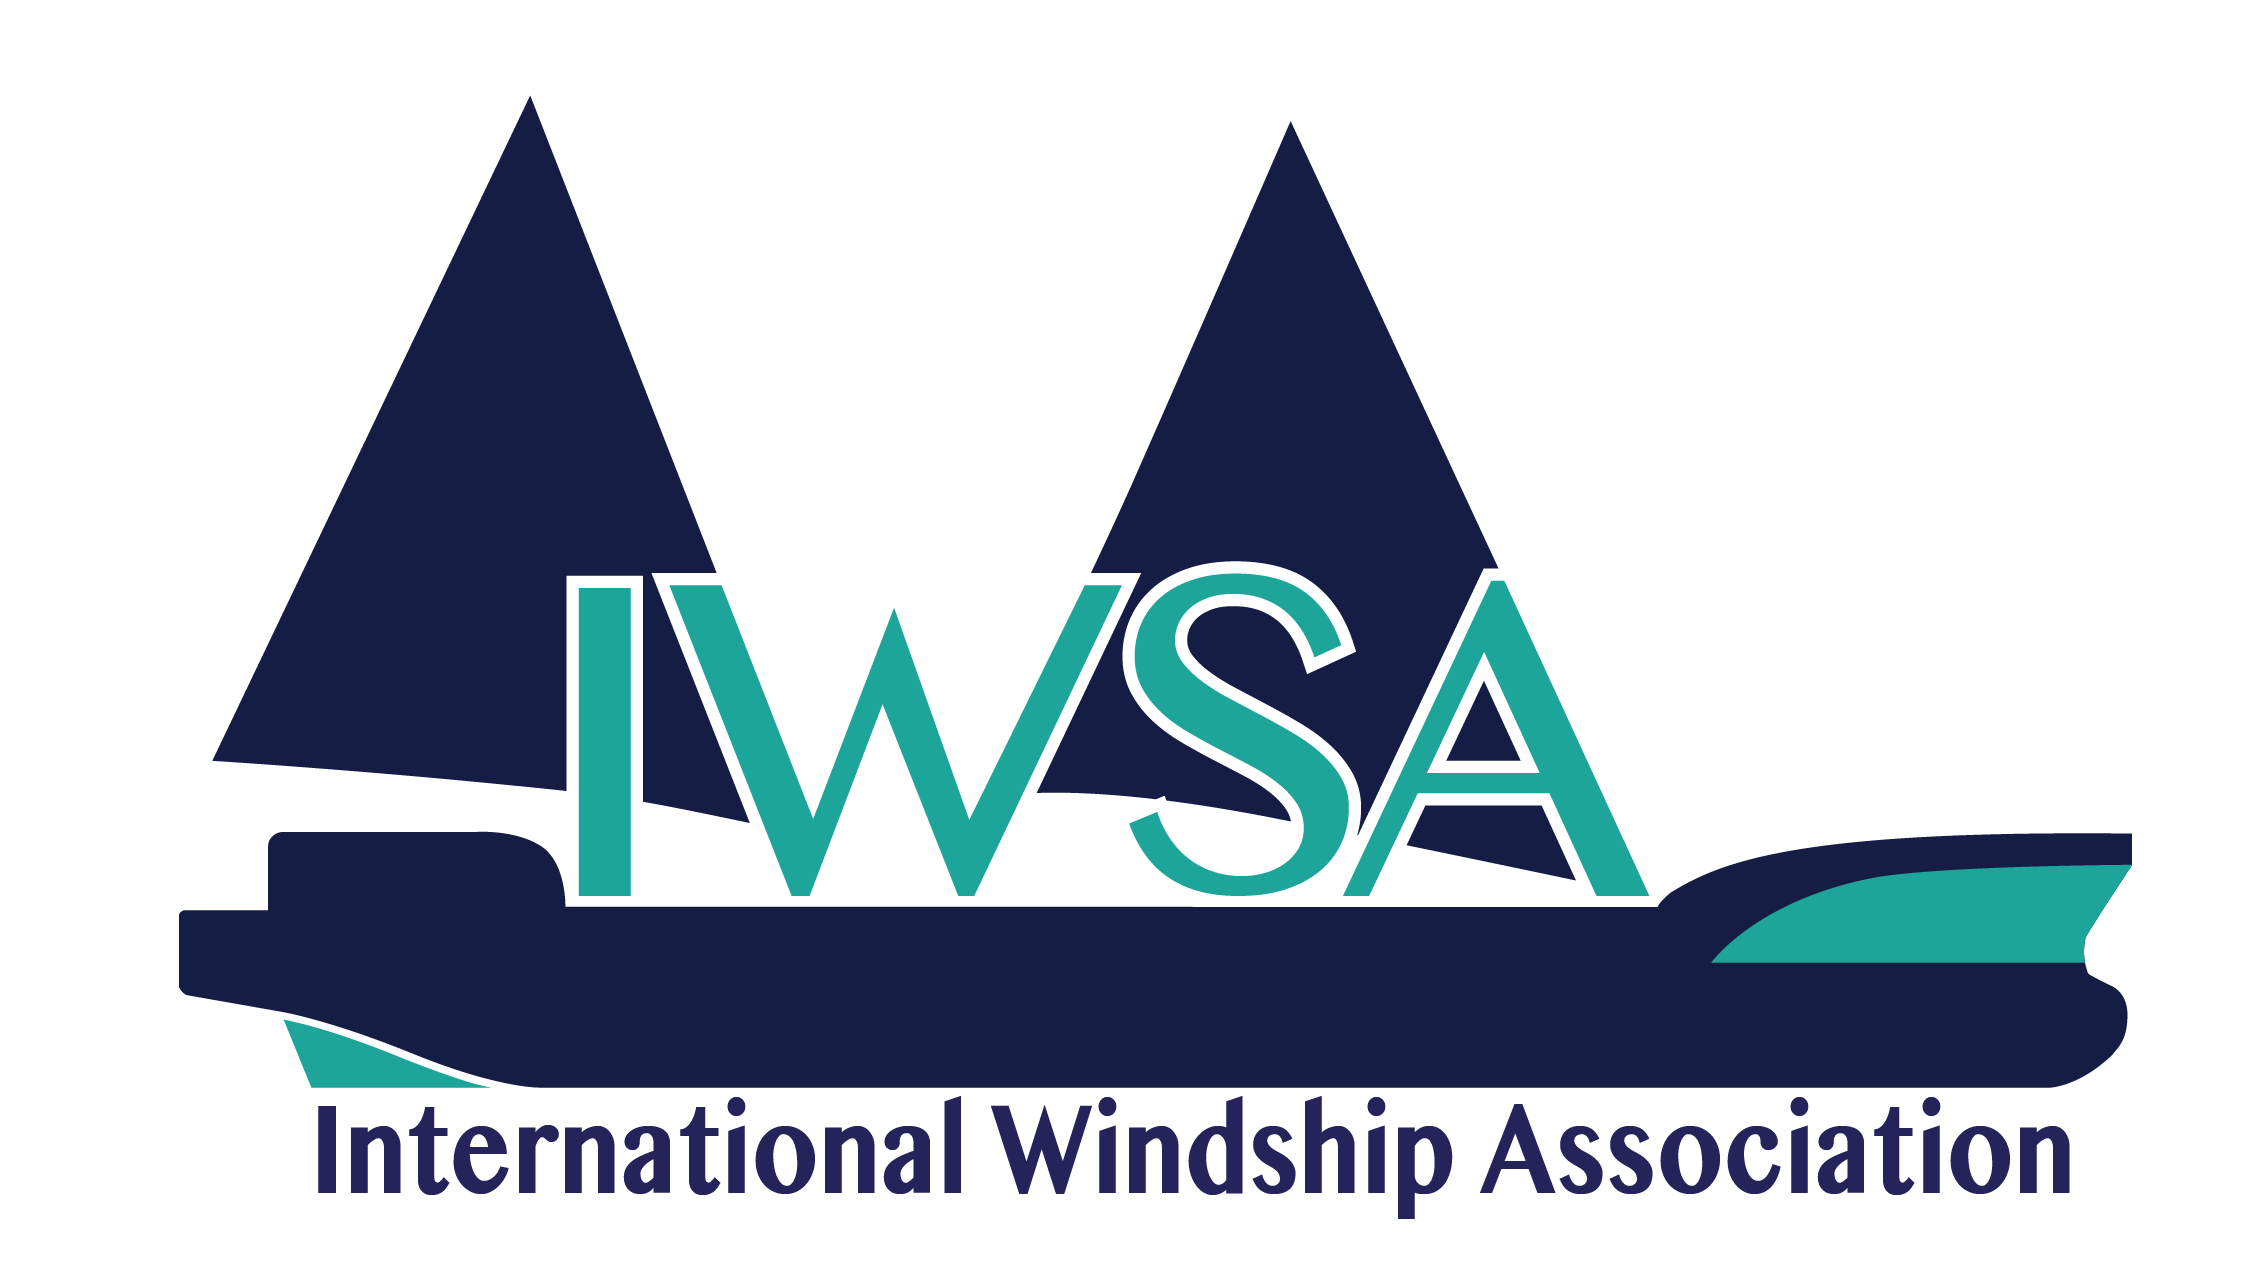 International Windship Association | Promoting Wind Propulsion Solutions for Commercial Shipping